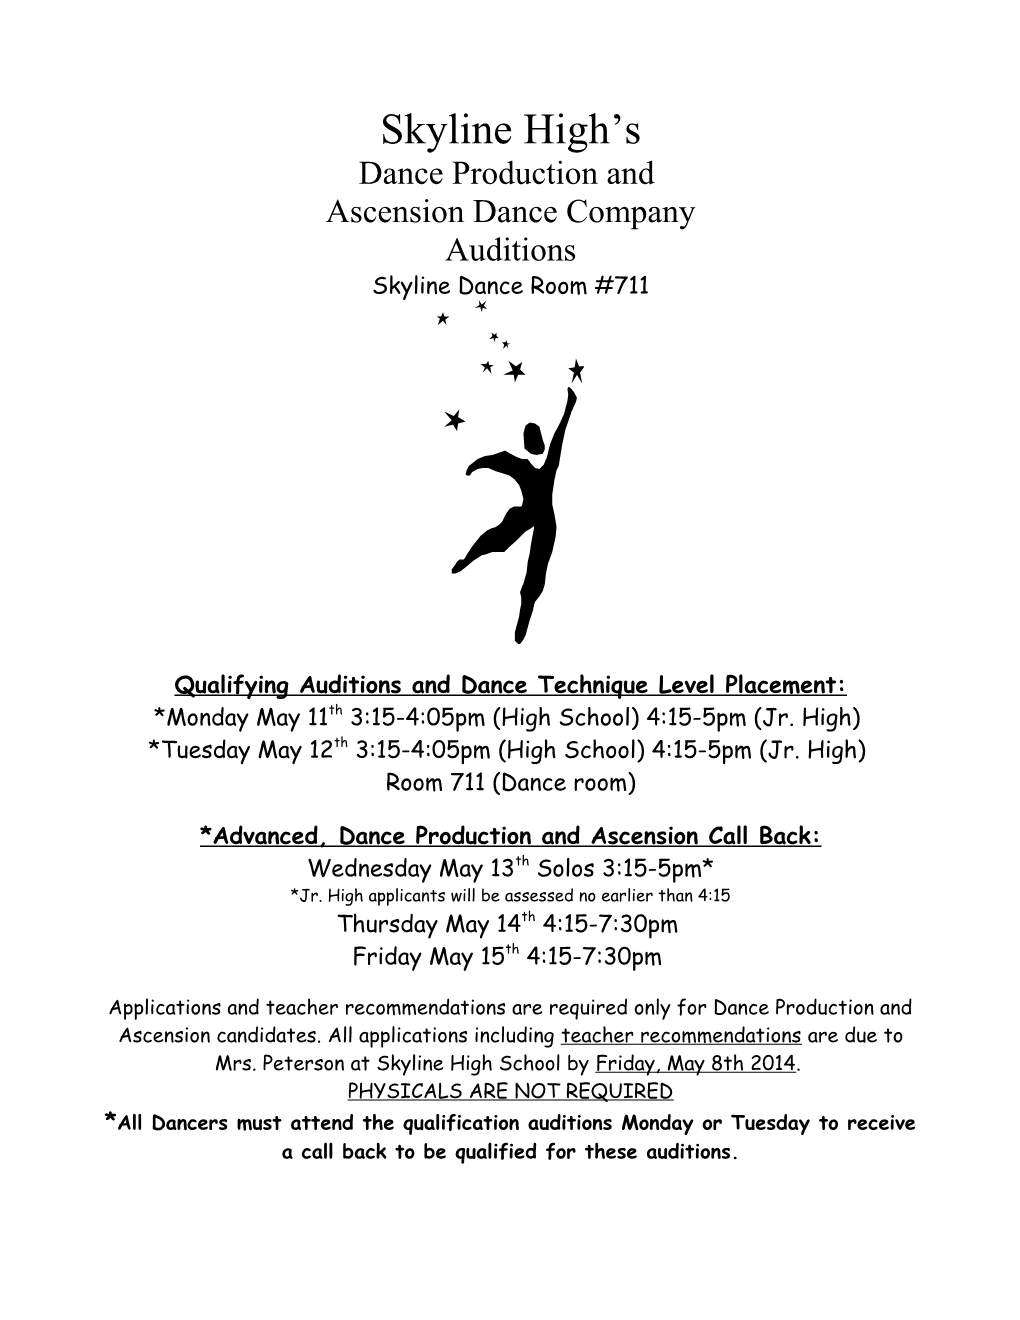 Qualifying Auditions and Dance Technique Level Placement